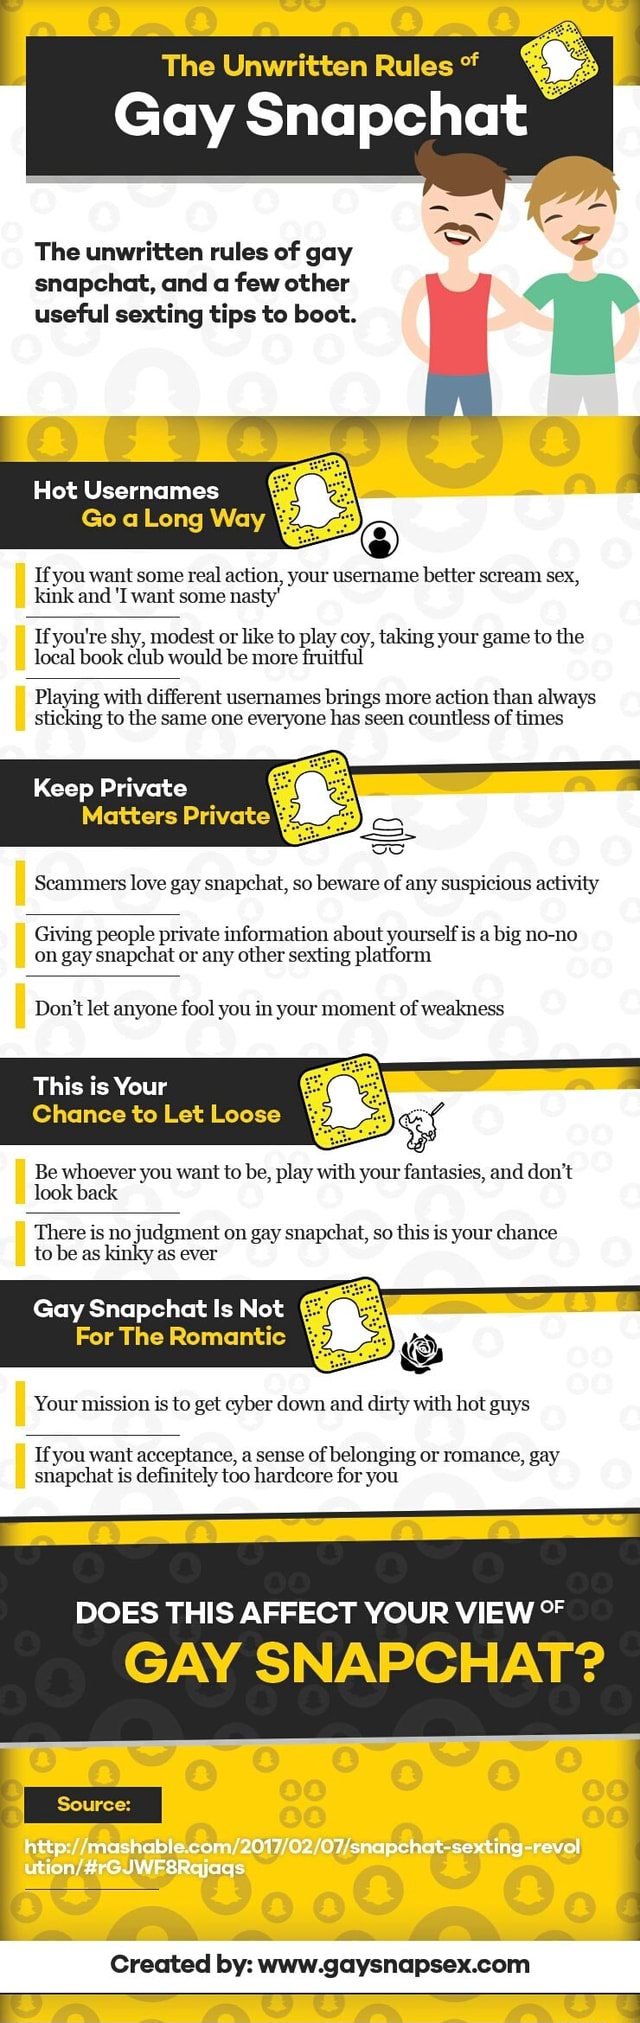 best gay snapchat users